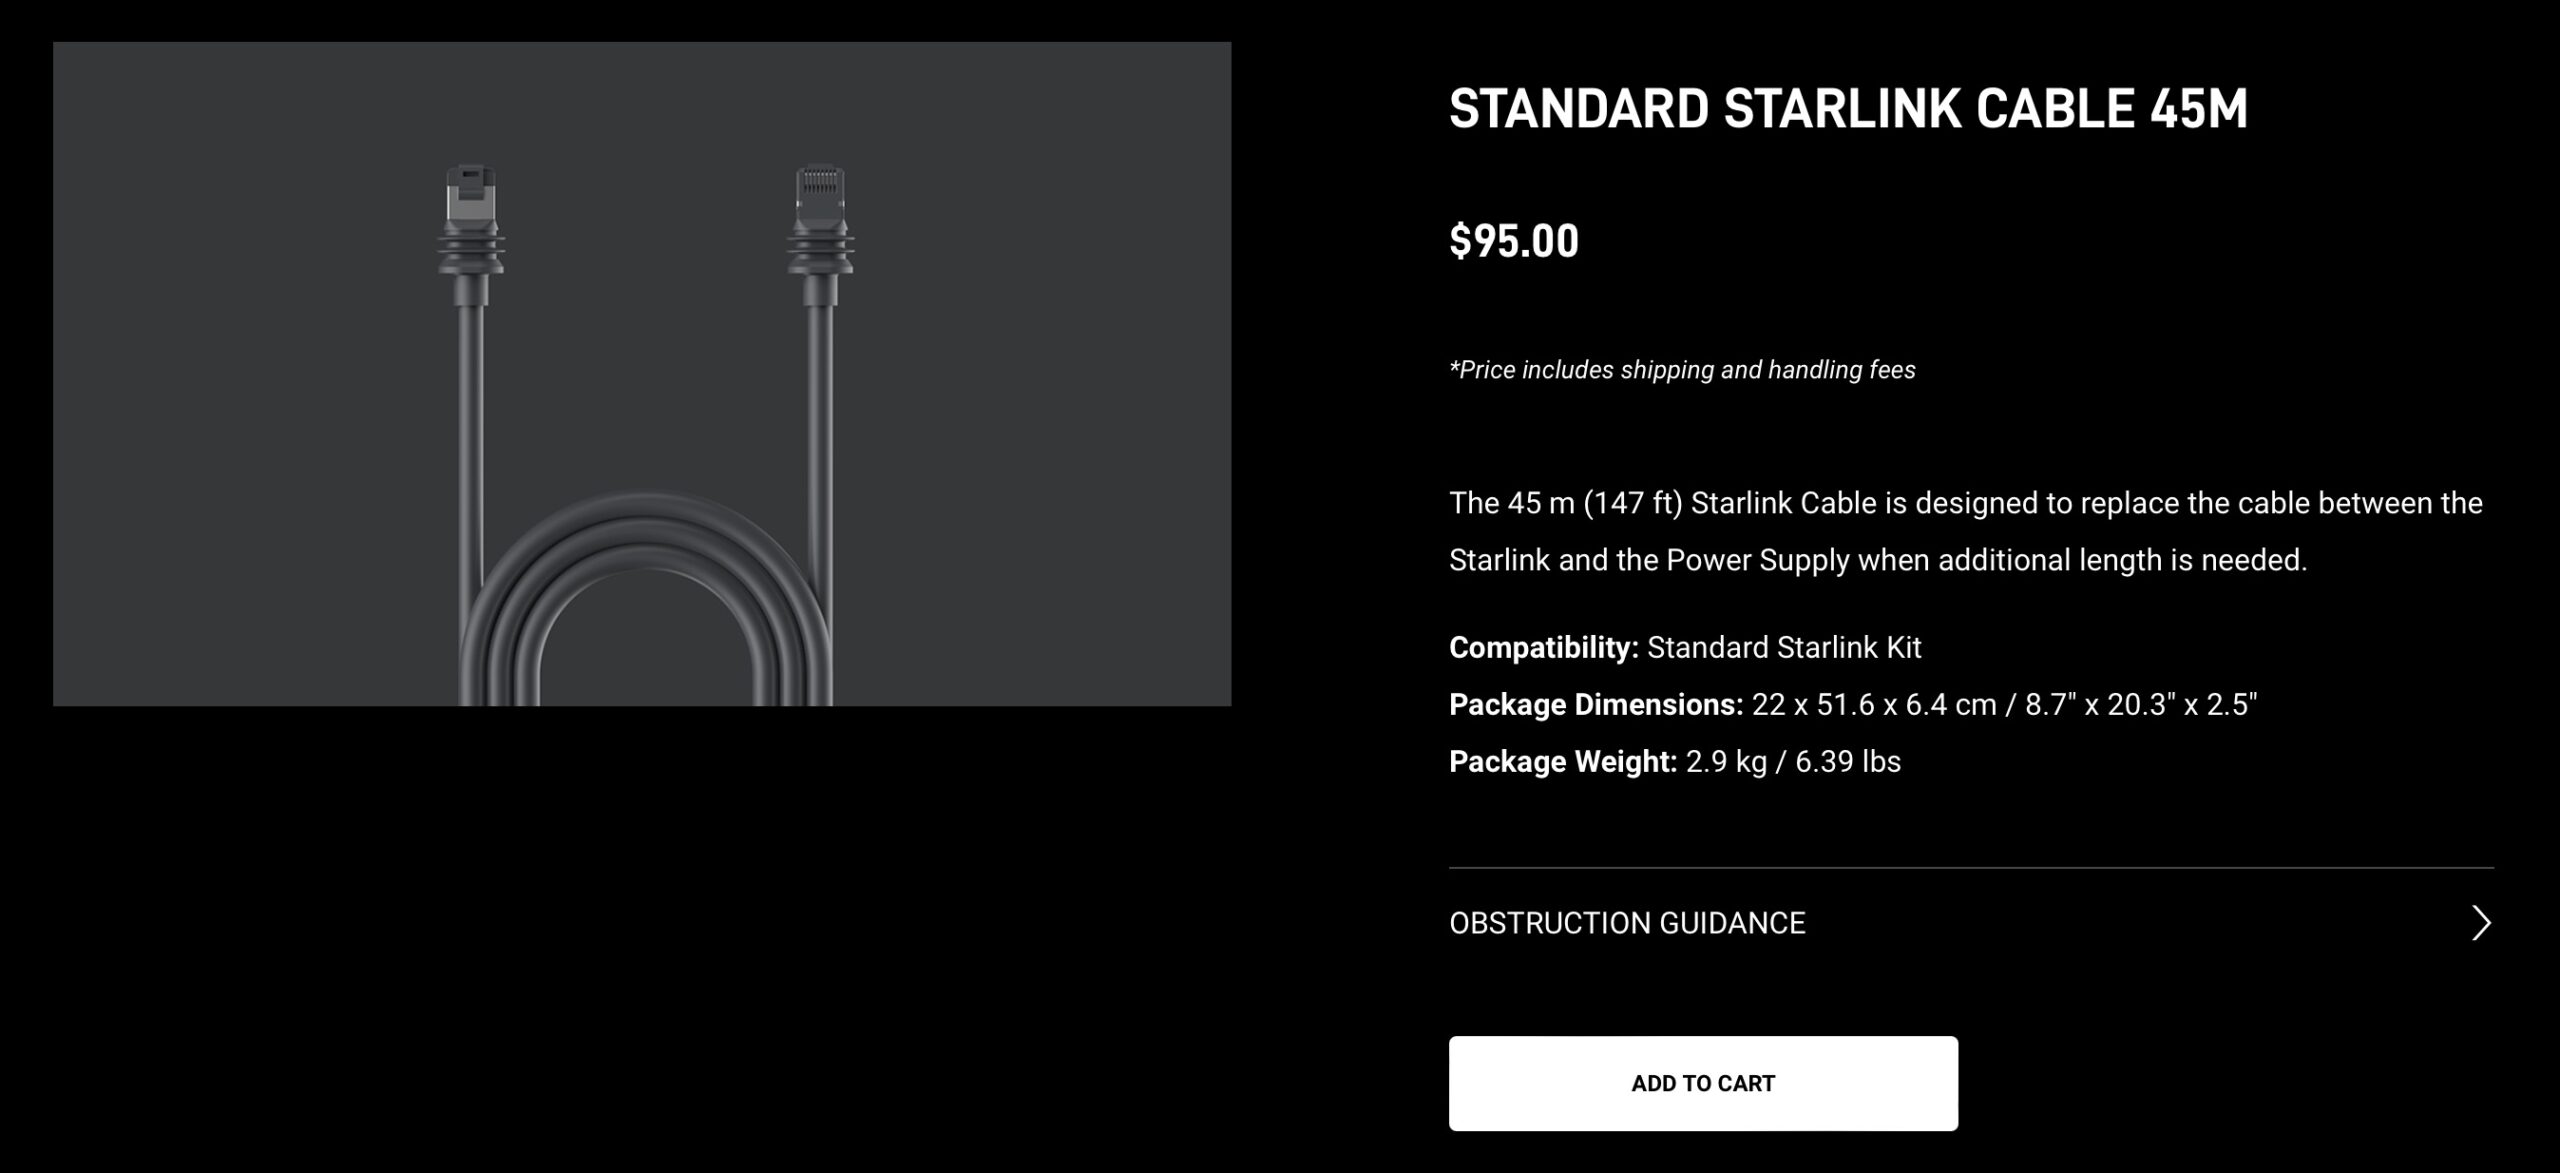 The 45M Standard Starlink cable is designed for installations that require additional distance between the dish and router.